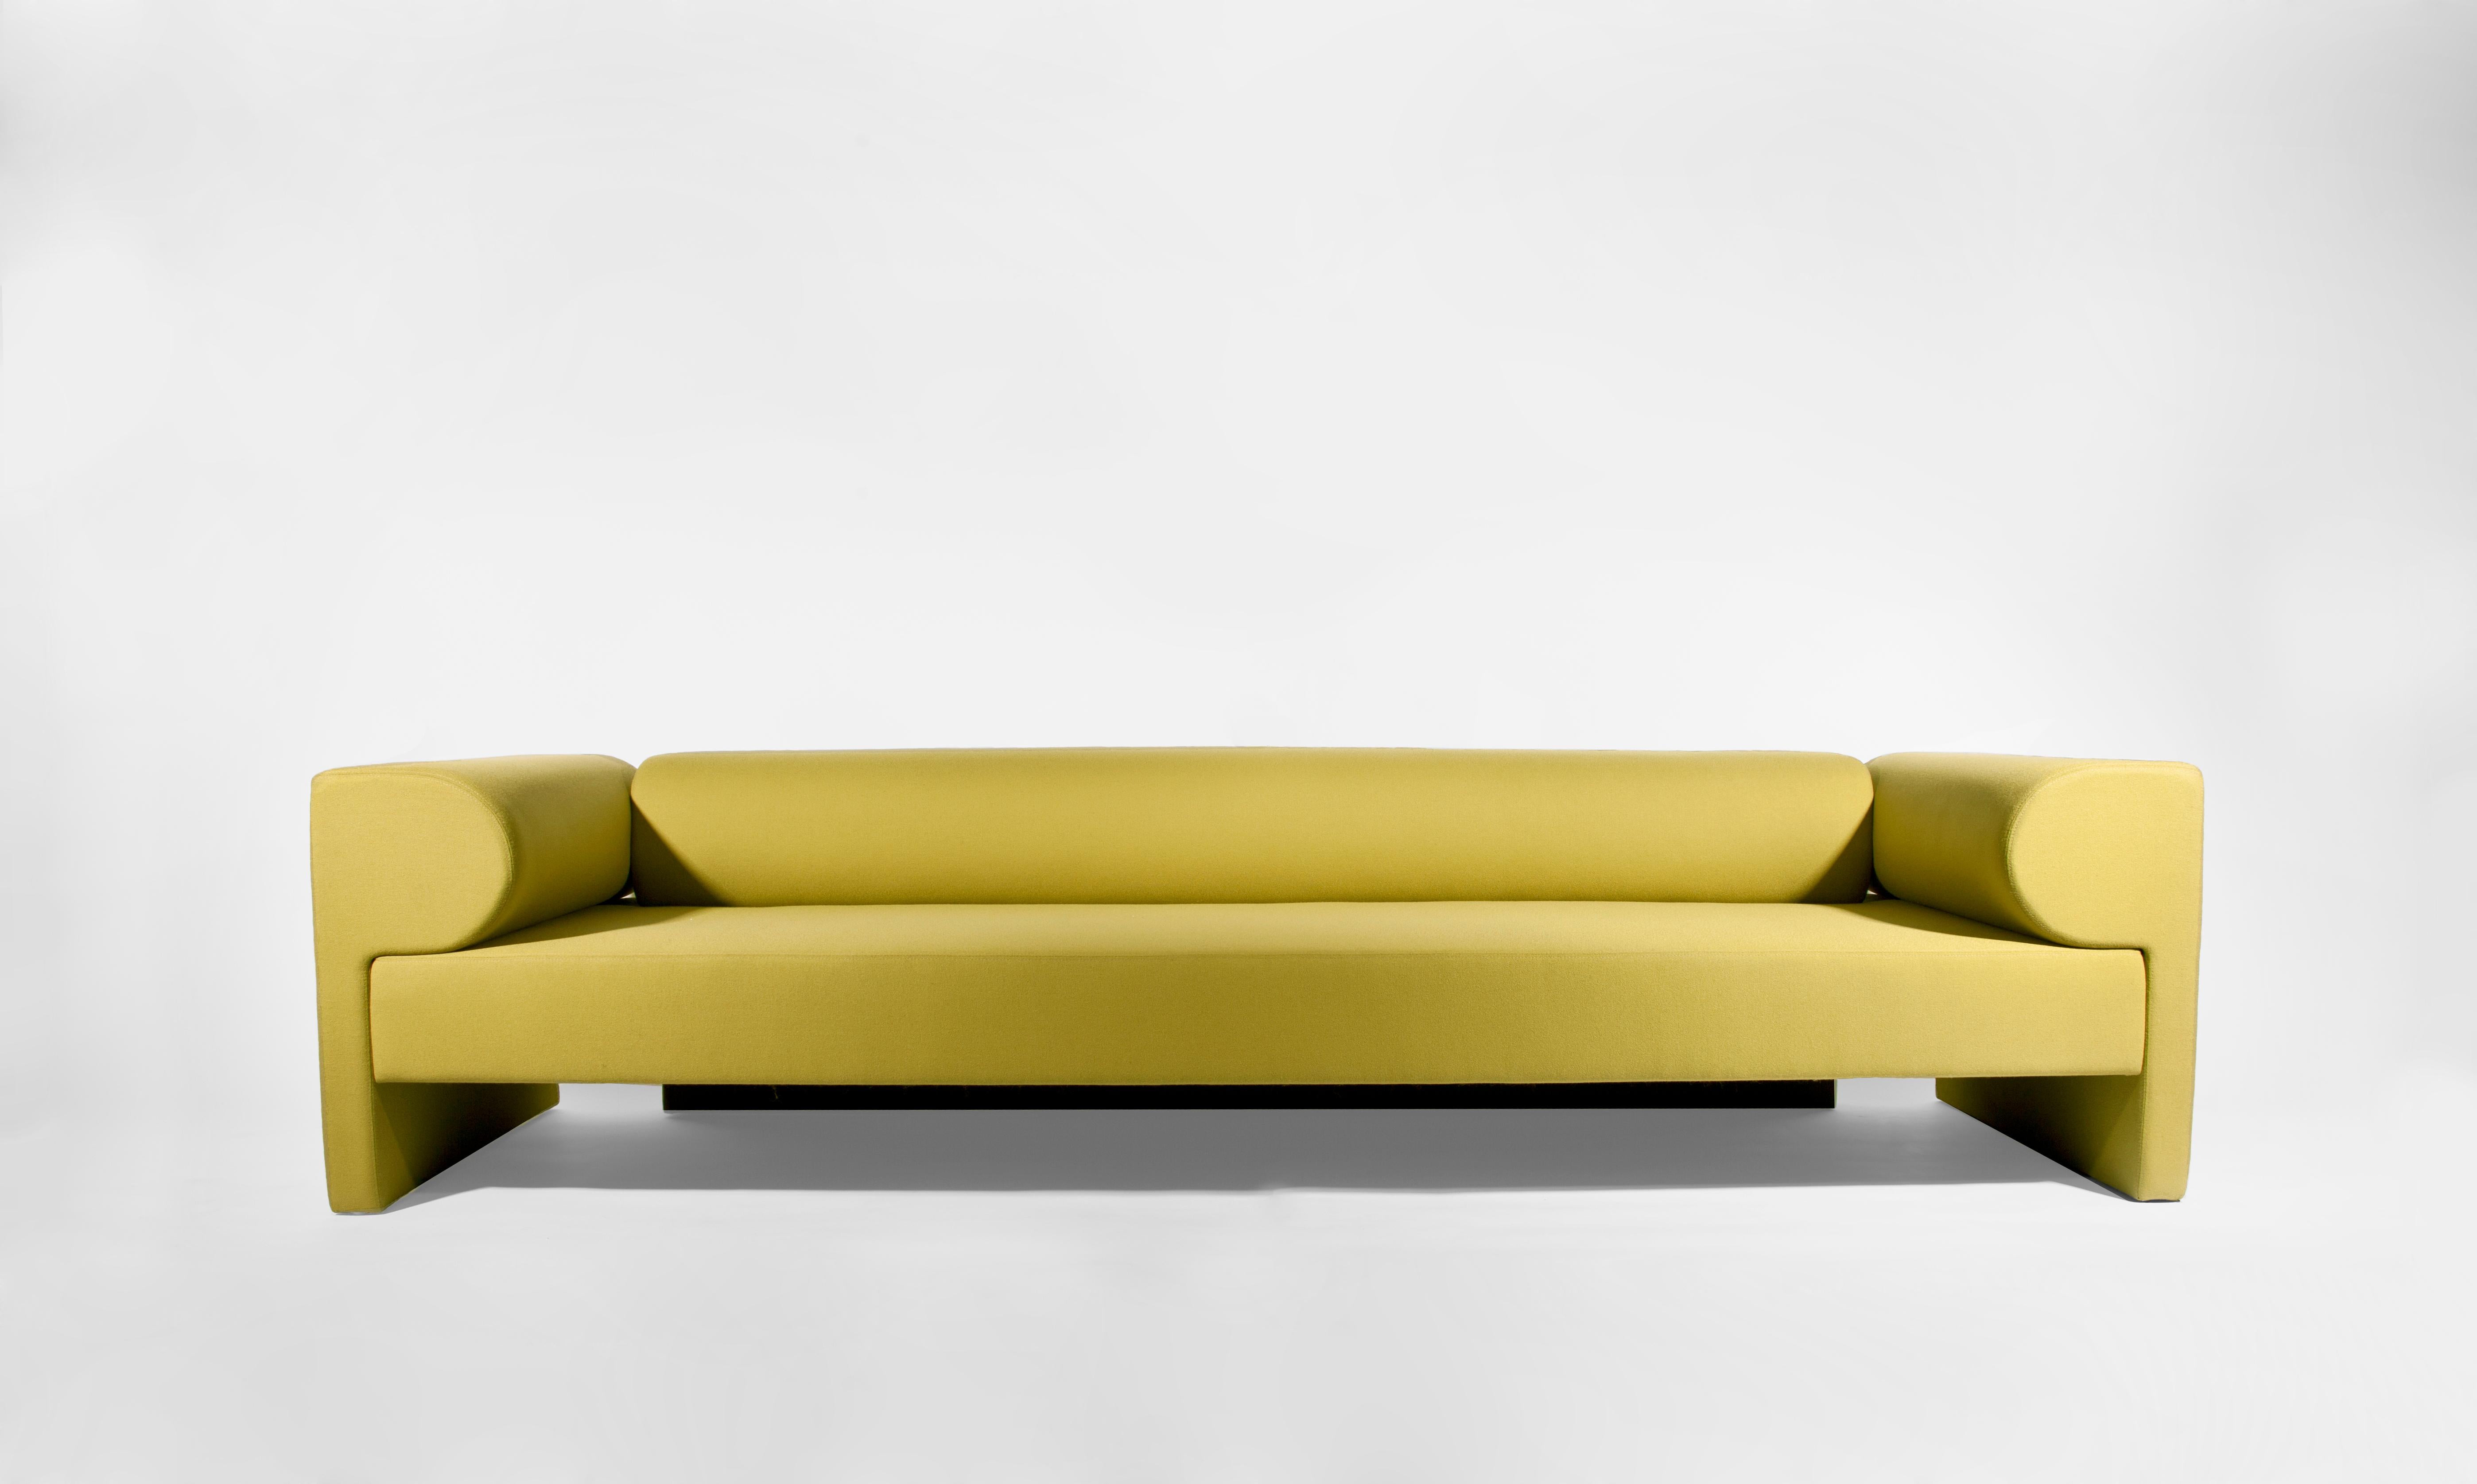 Yellow say sofa by Gentner Design.
Dimensions: D 271 x W 86 x H 63.5 cm.
Materials: fabric.
COM available.

Strong formal lines and geometric shapes seem like puzzle pieces that come together defining the Say Sofa. COM options and other